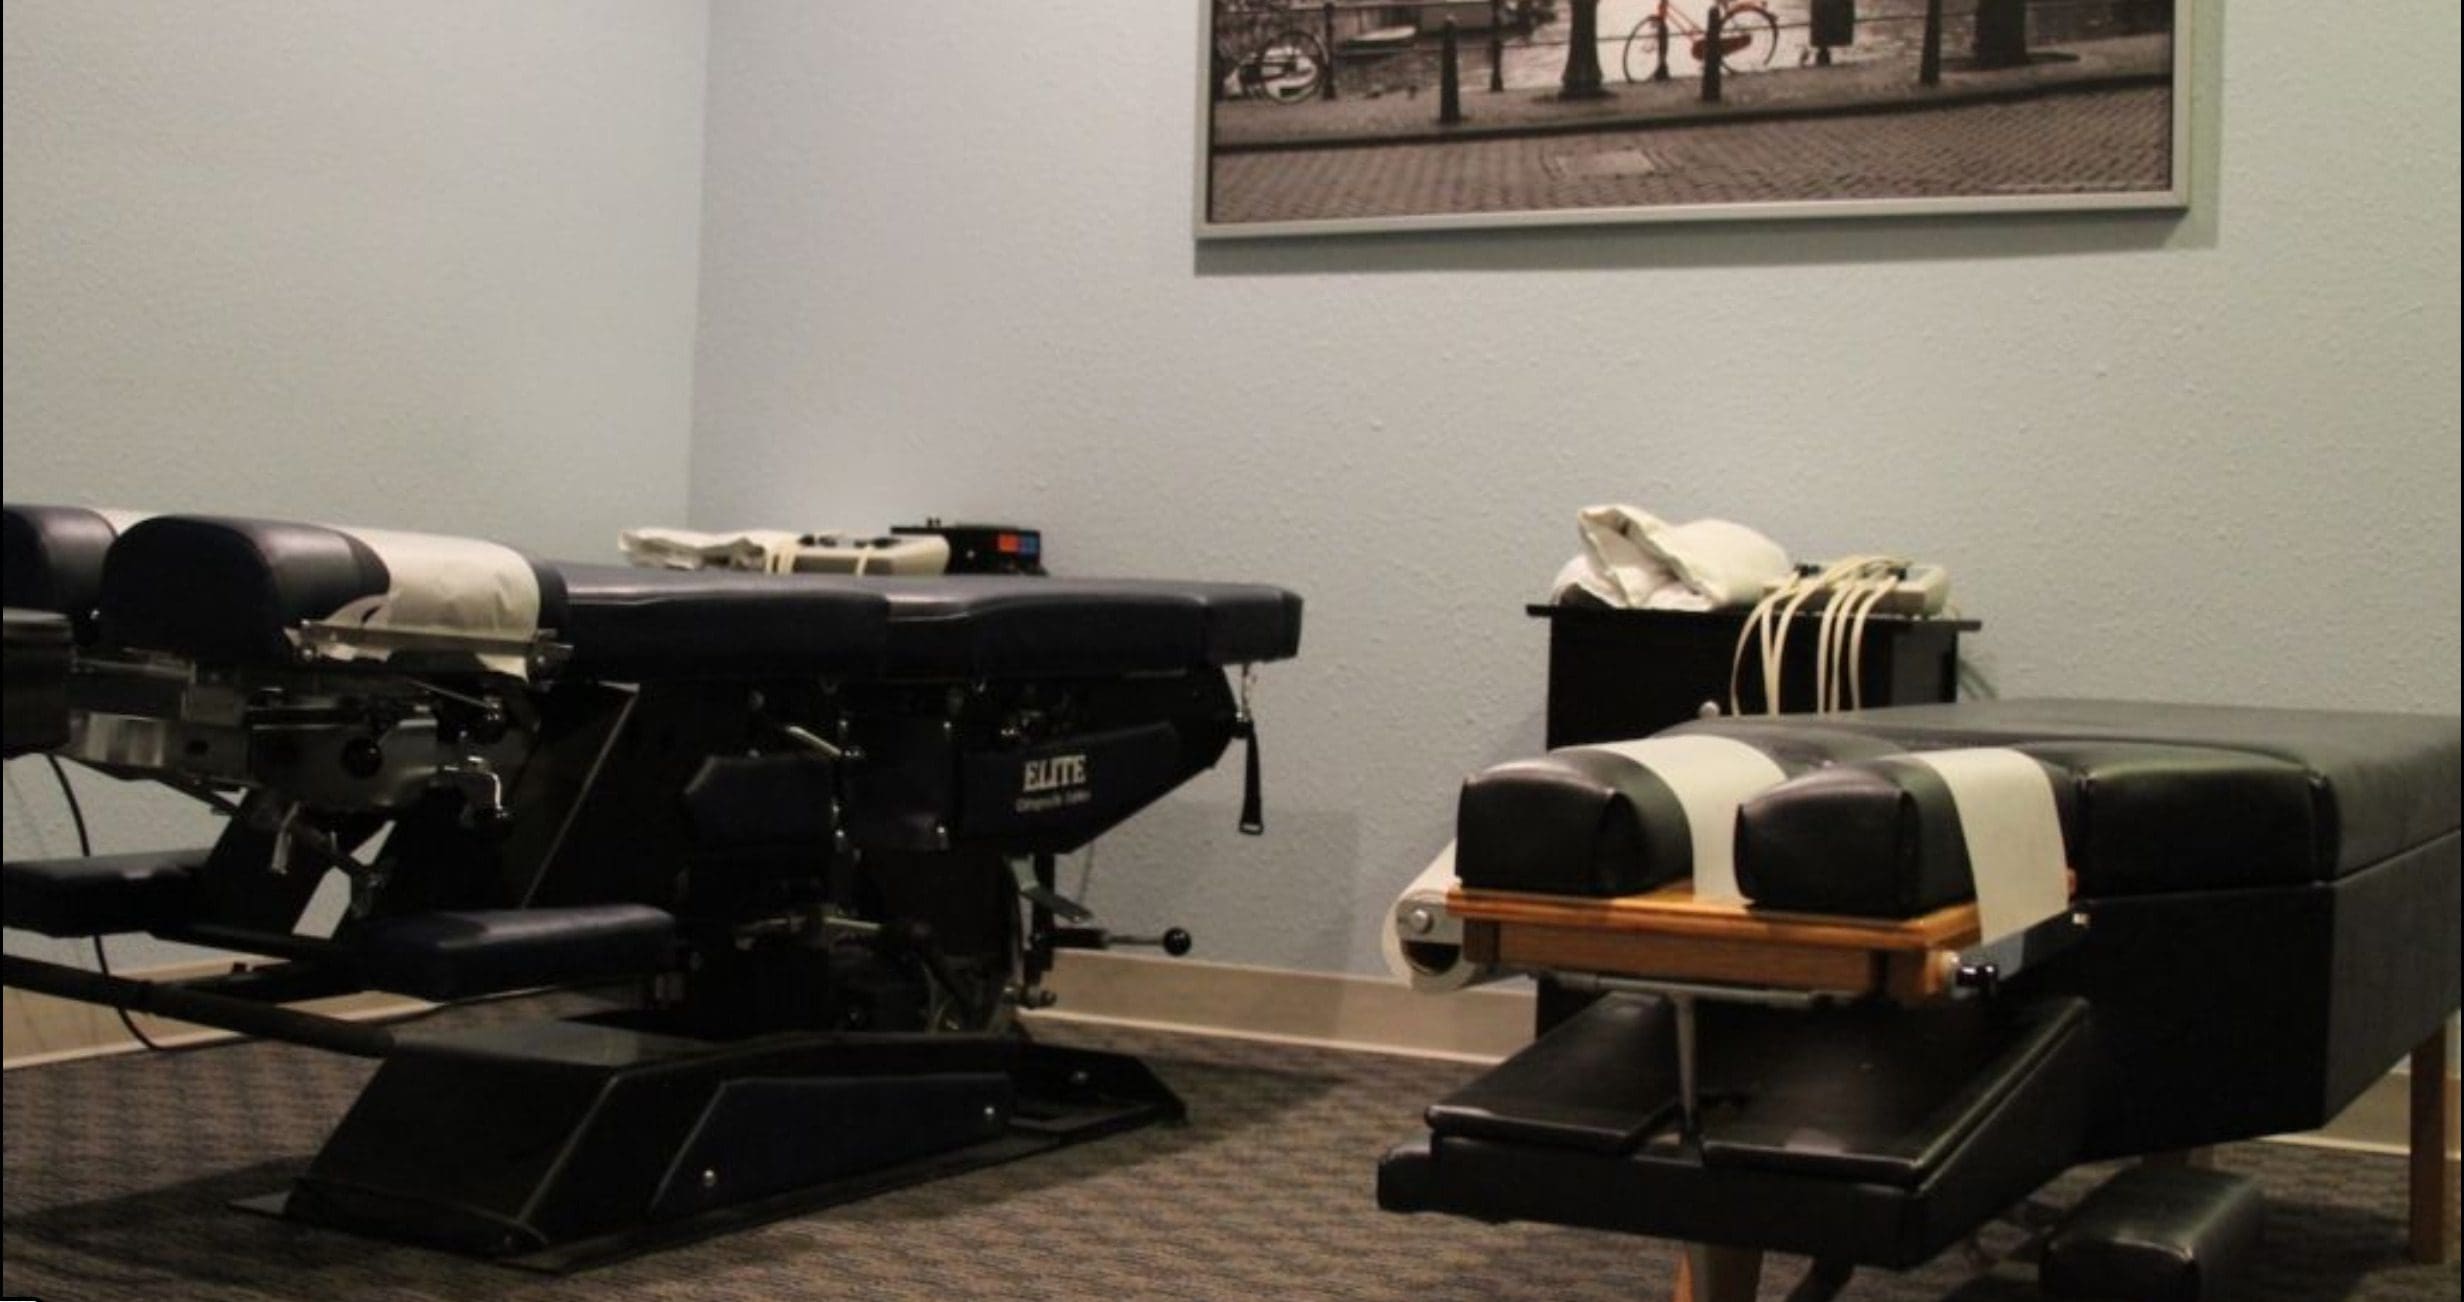 Gresham Accident Care Chiropractic adjustment tables in a treatment room.